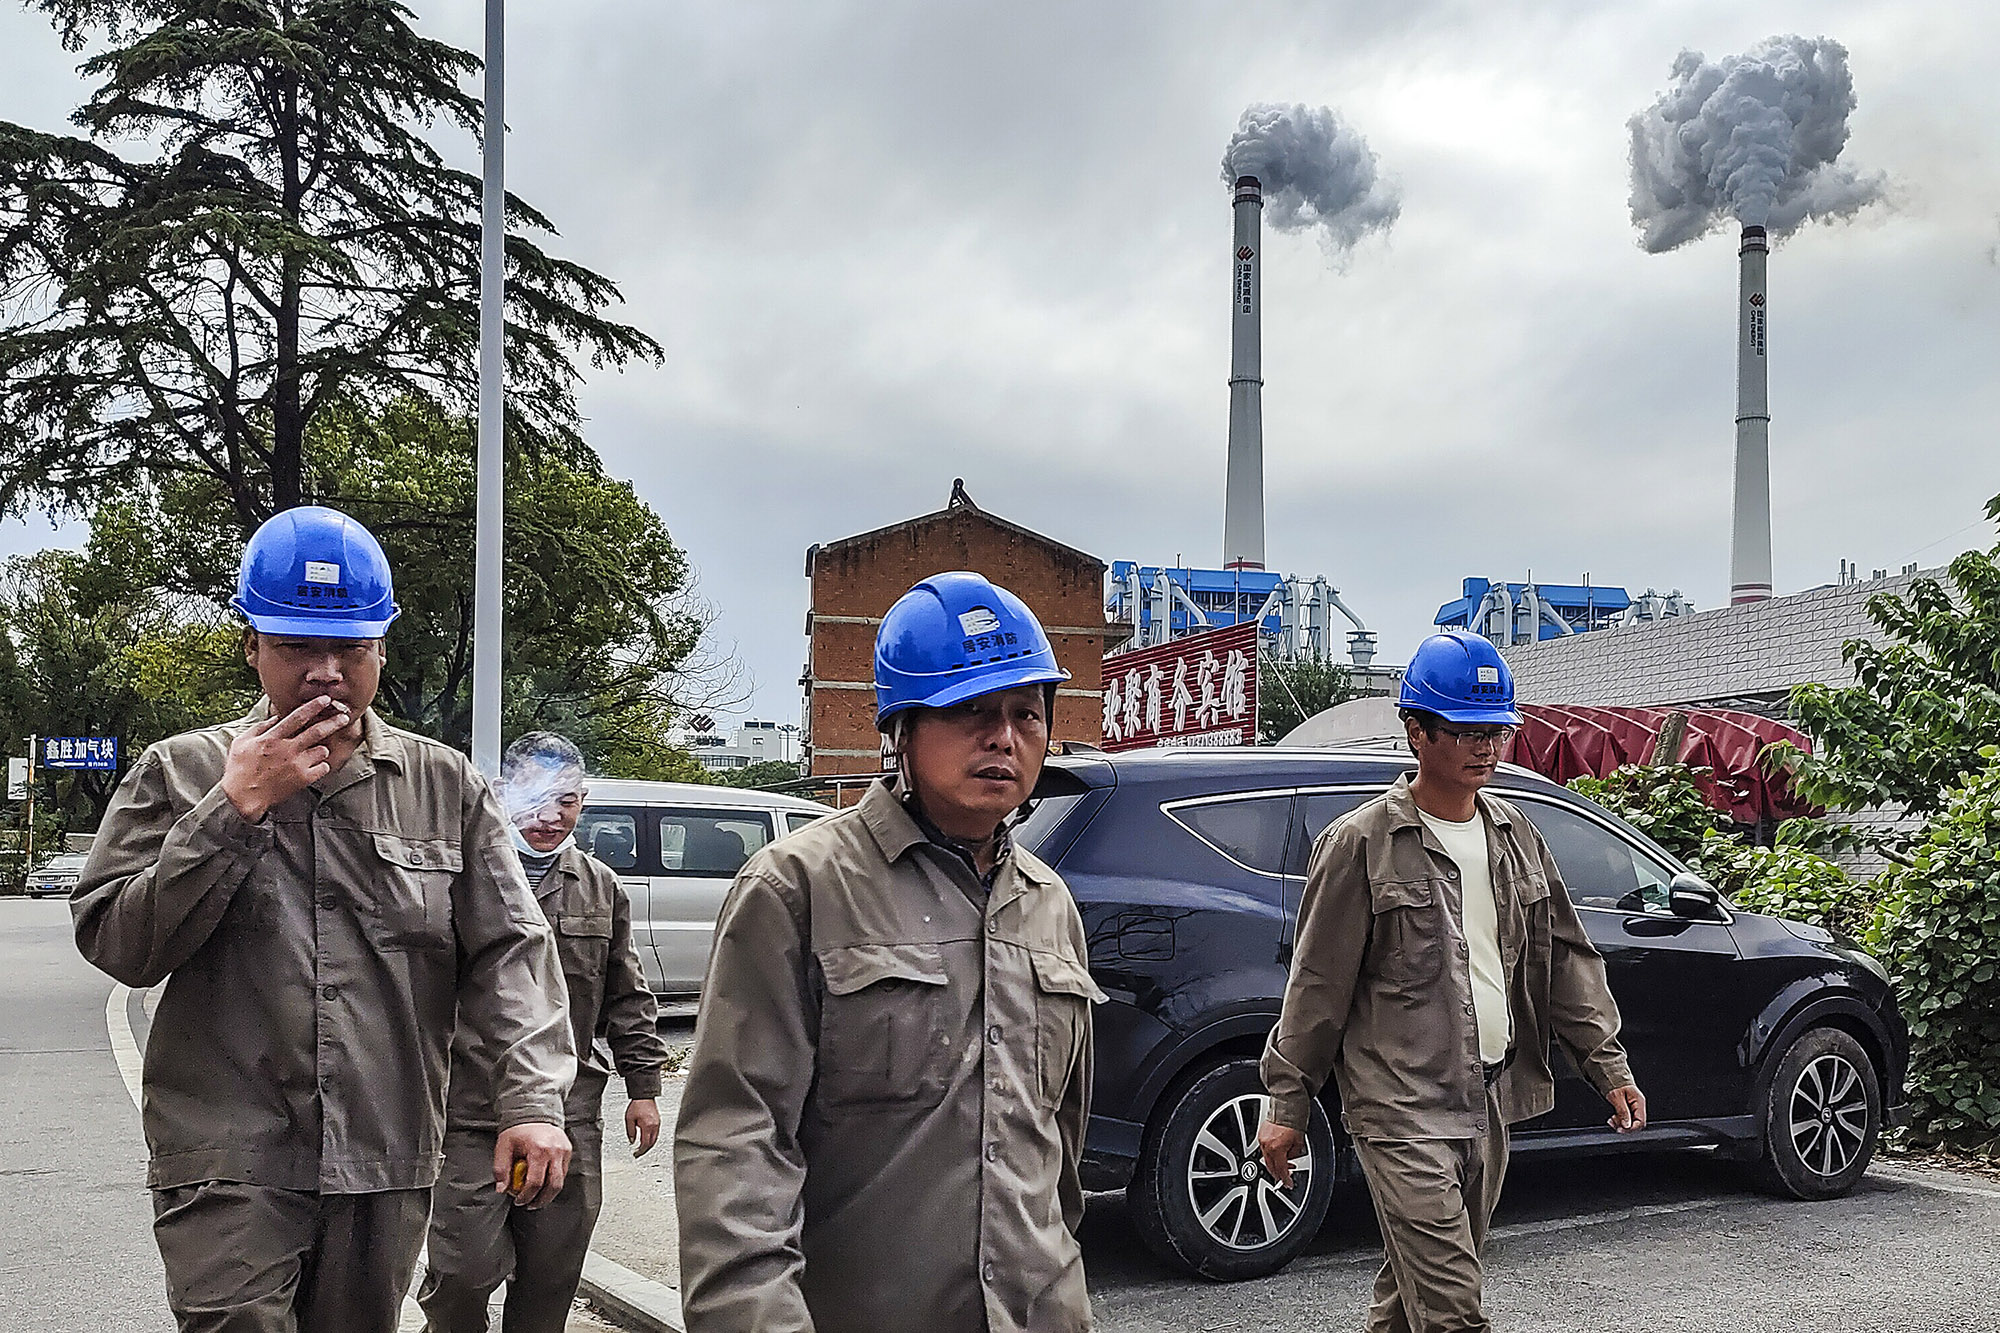 Workers walk past a coal fired power plant&nbsp;in Hanchuan, Hubei province, China.